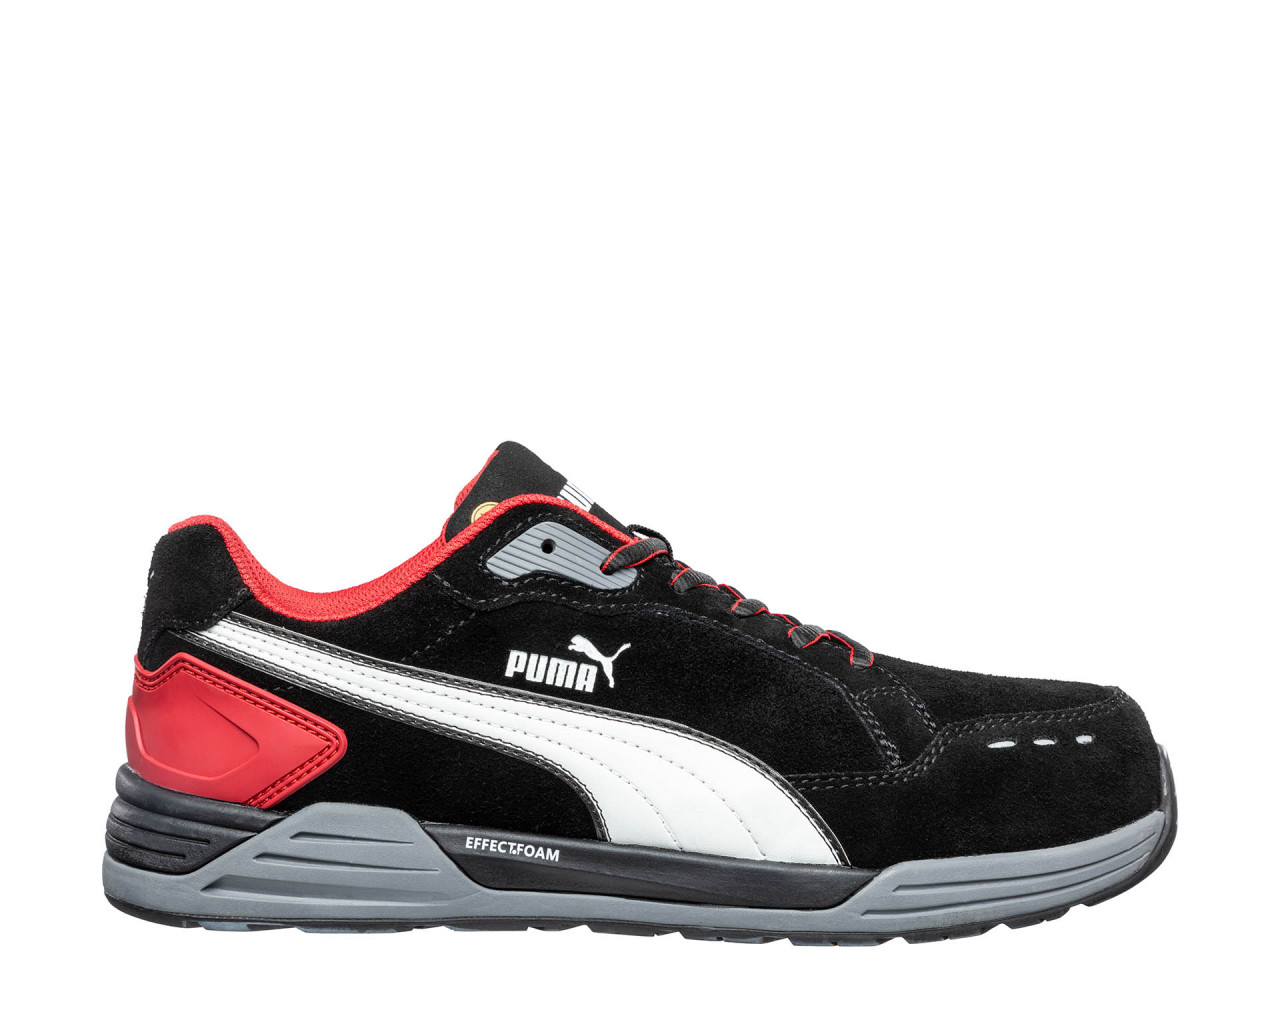 PUMA SAFETY safety SRC LOW AIRTWIST Safety English Puma S3 ESD HRO BLK/RED shoes 